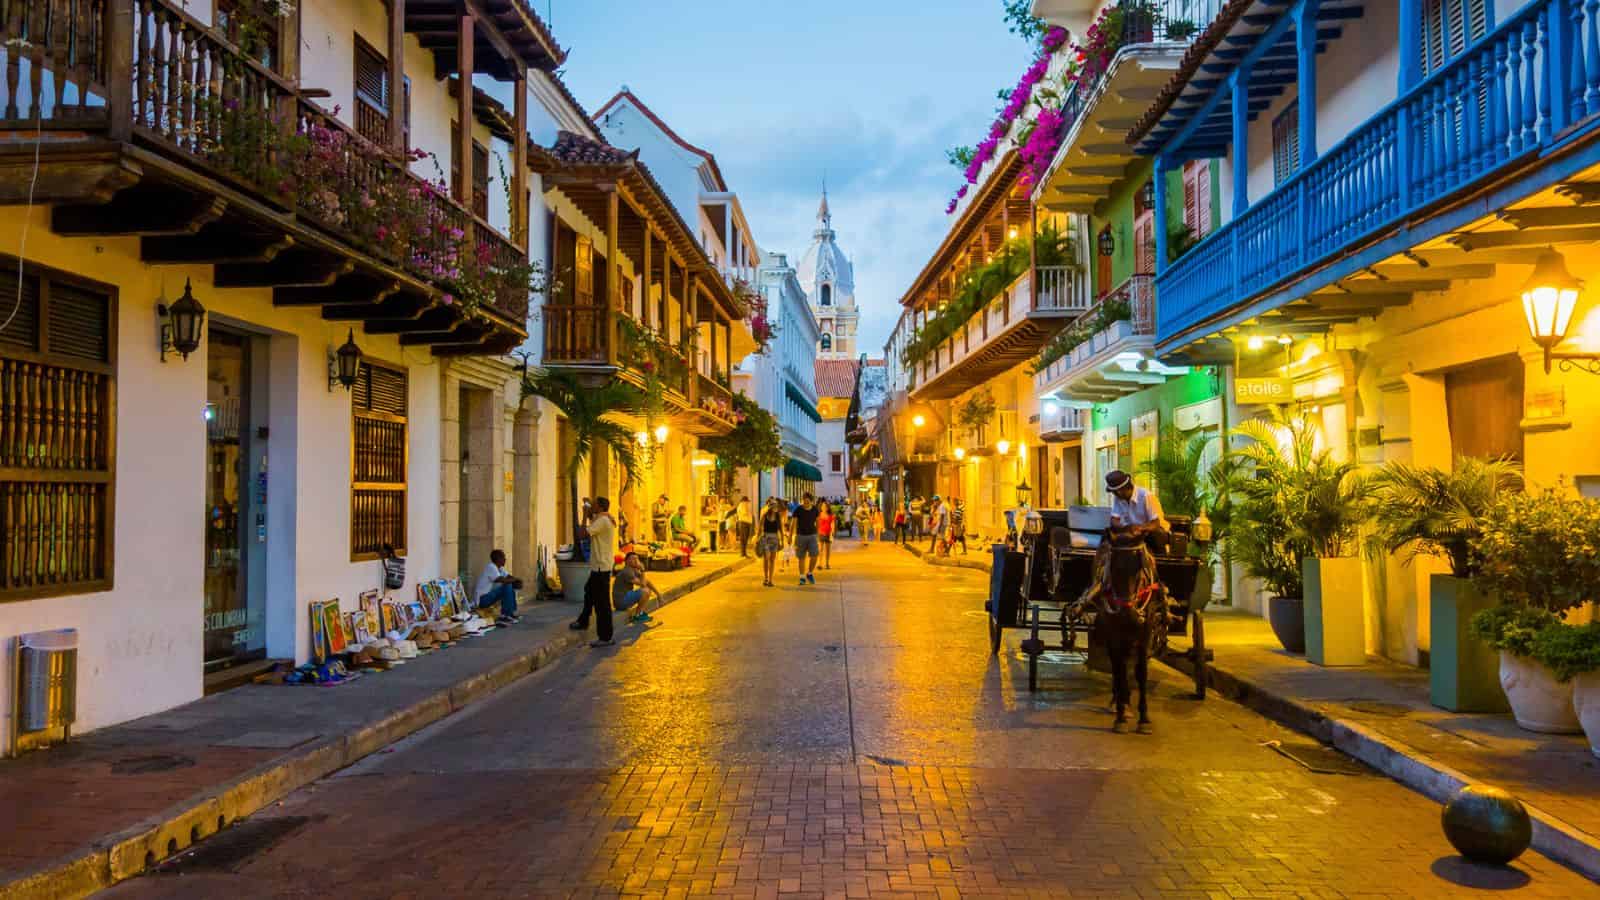 A vibrant street scene at dusk in cartagena, colombia, showing a horse-drawn carriage, pedestrians, and colonial buildings with balconies adorned with flowers.